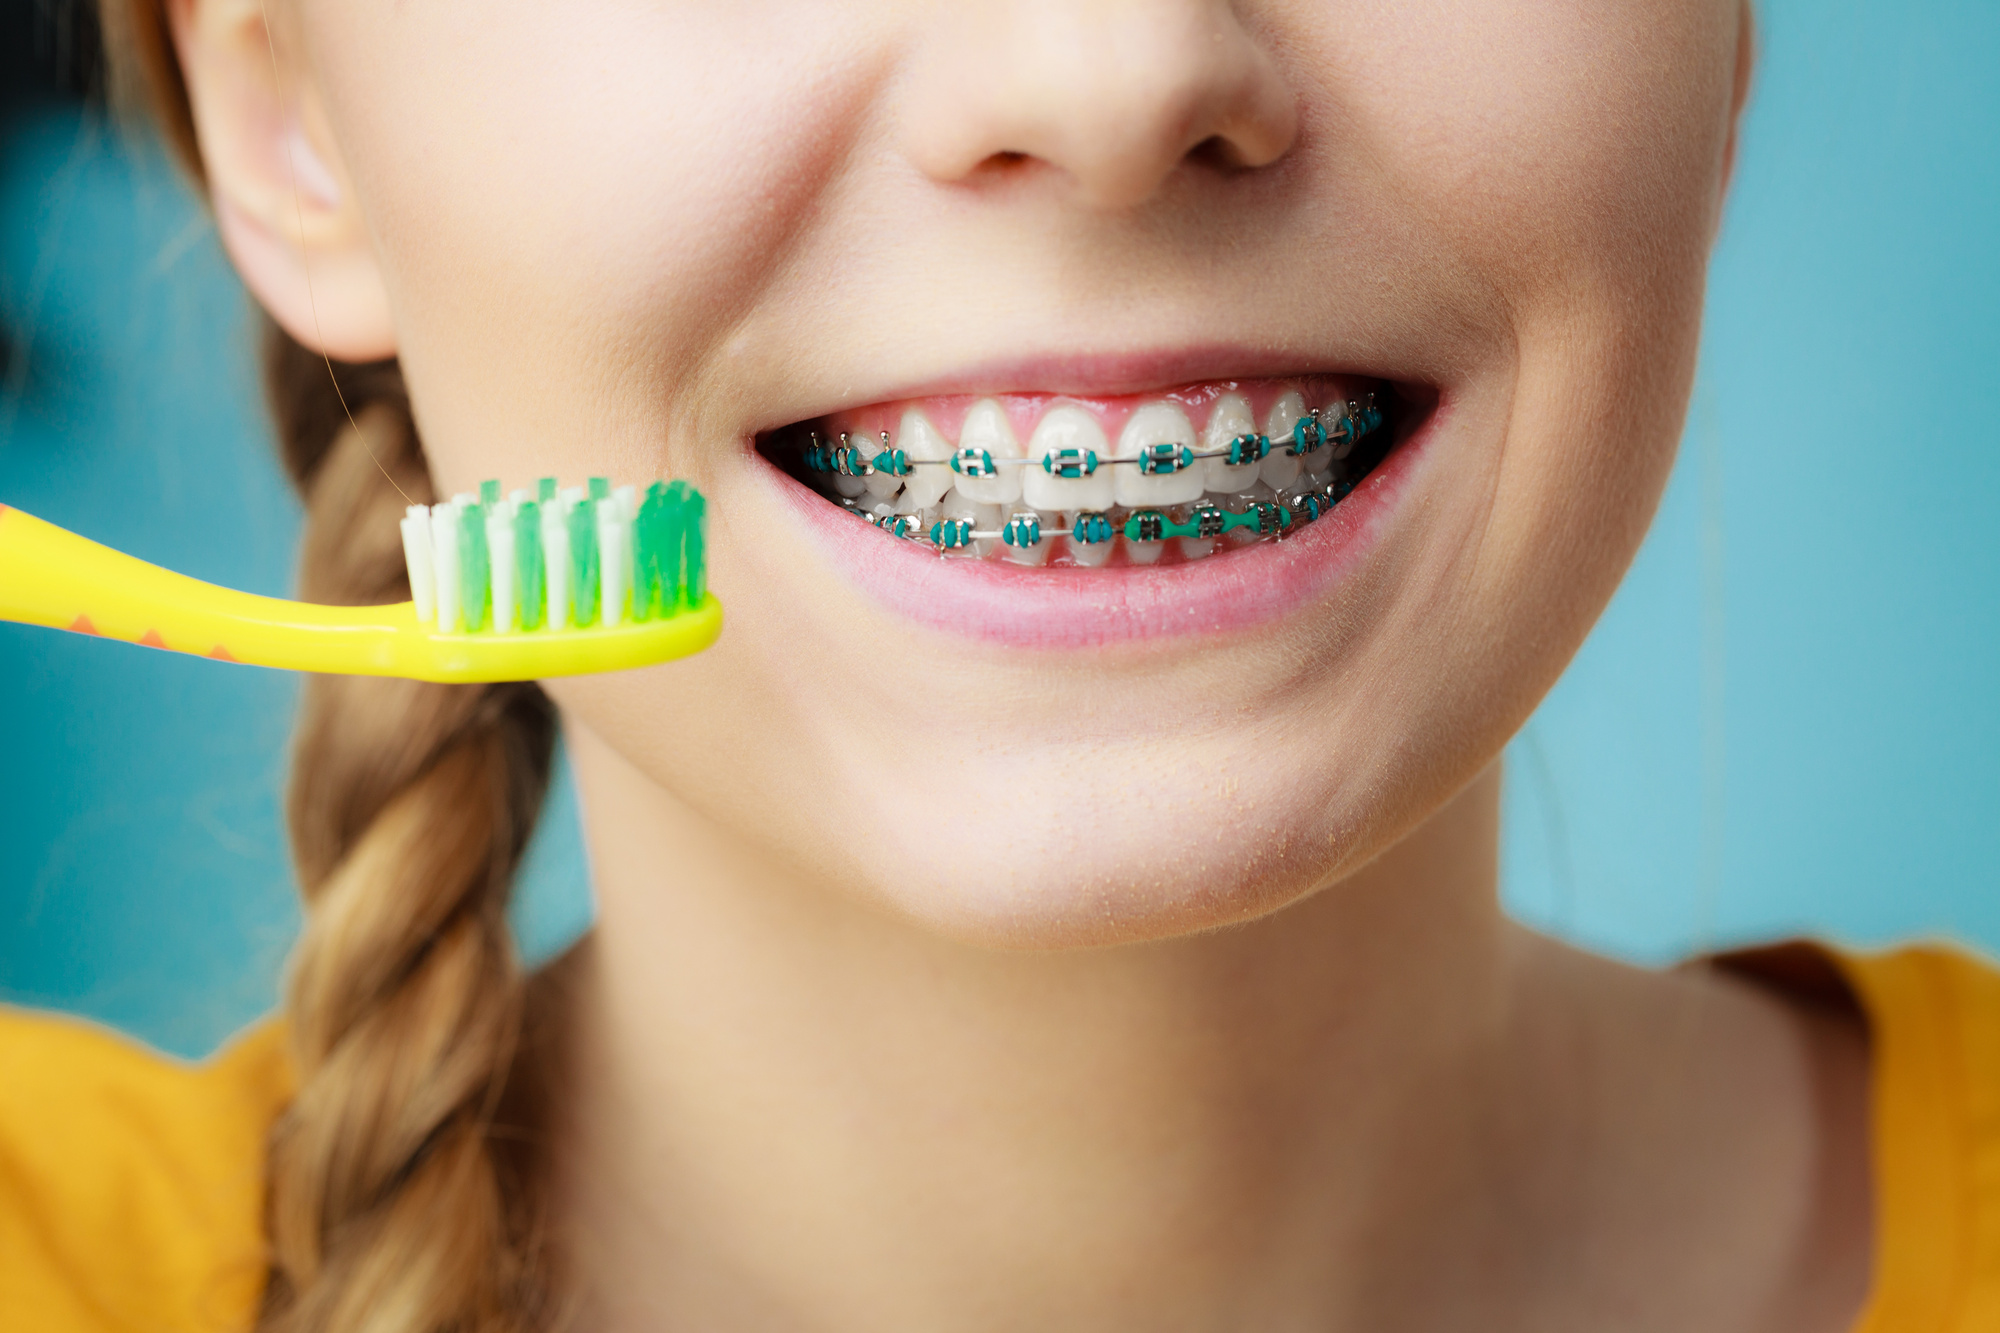 How much are braces for adults and children, and how can you manage the costs? Read this guide to learn about average prices and how to afford them.